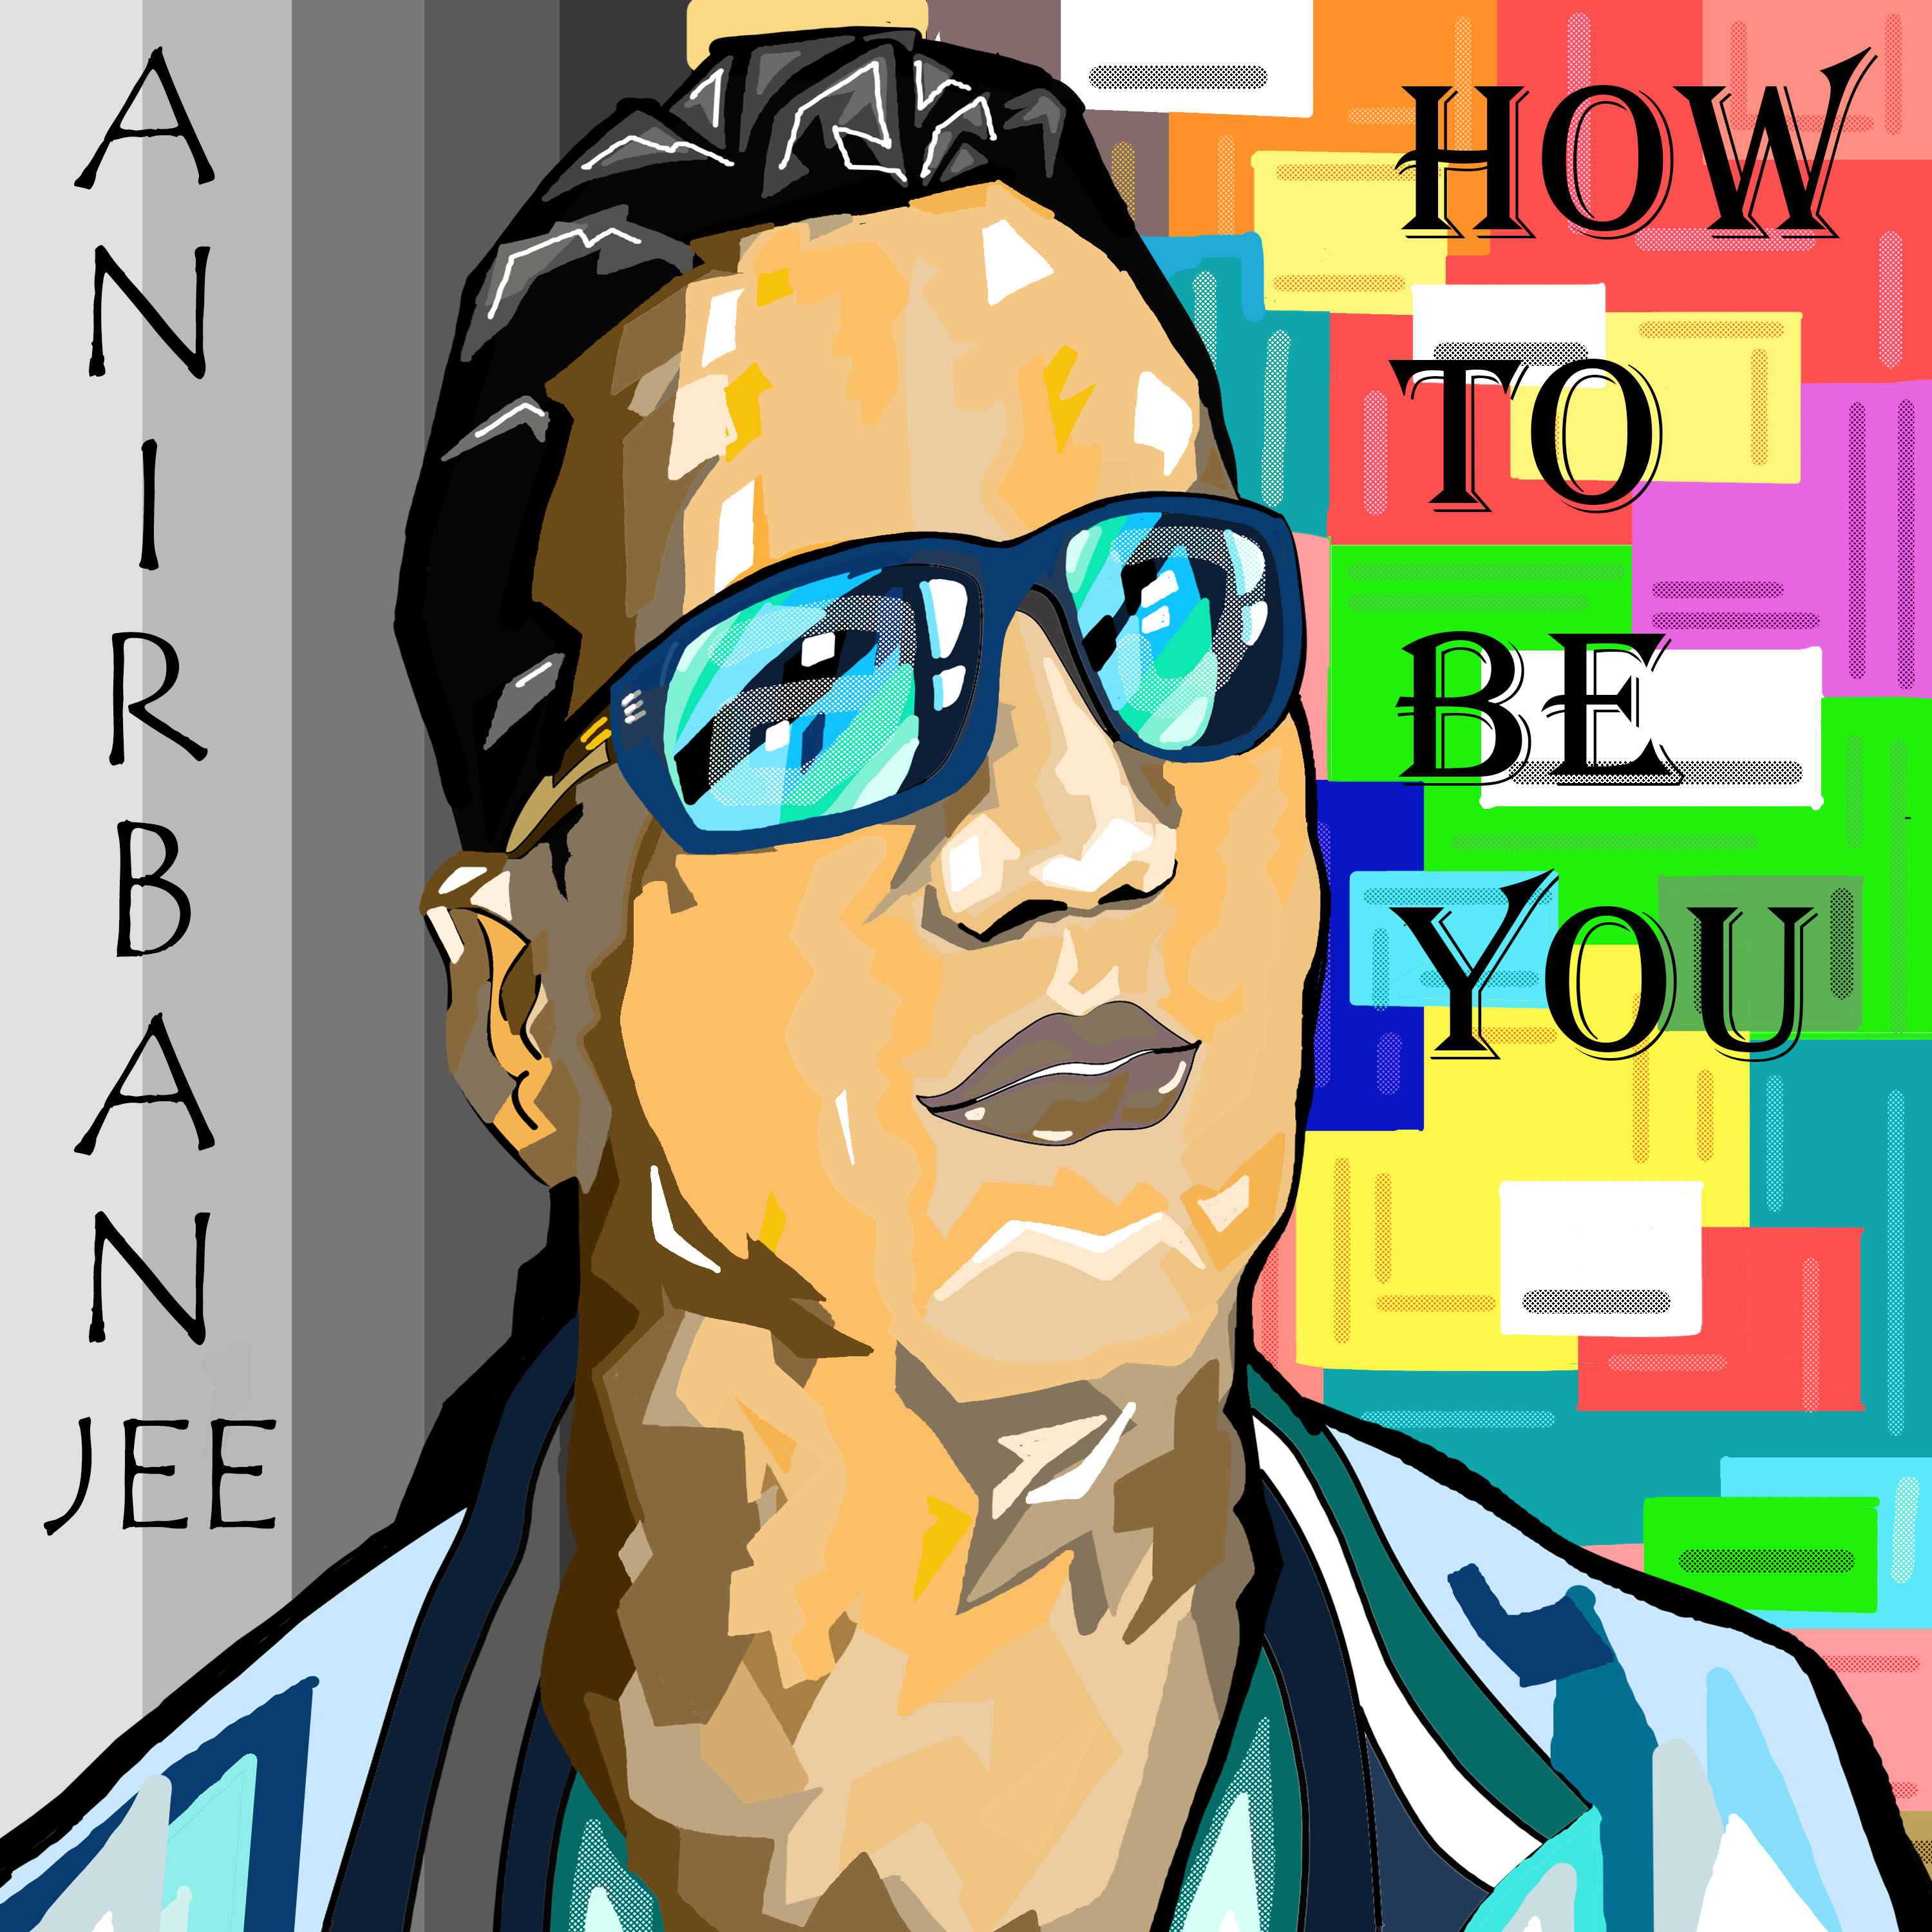 How to be you artwork